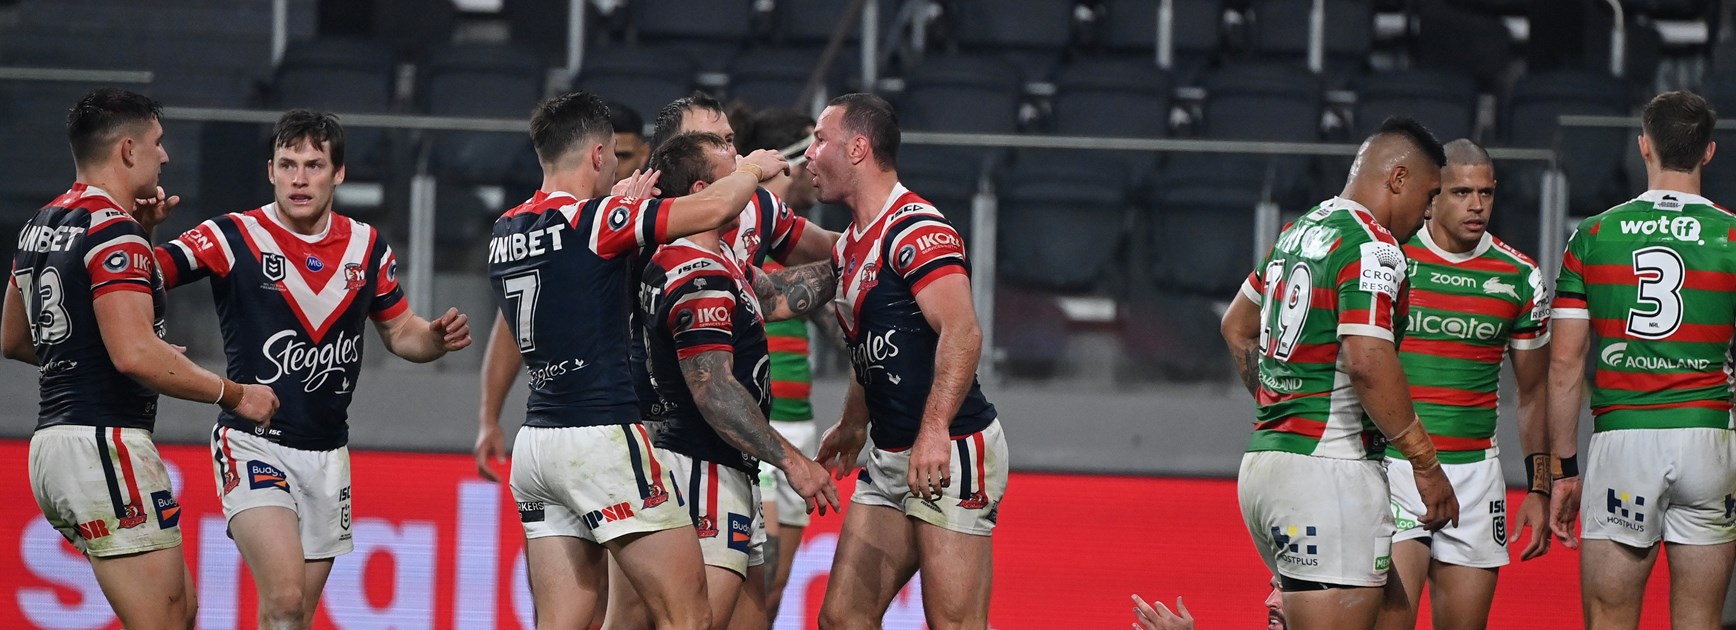 Tedesco stamps class as Roosters open their account in style